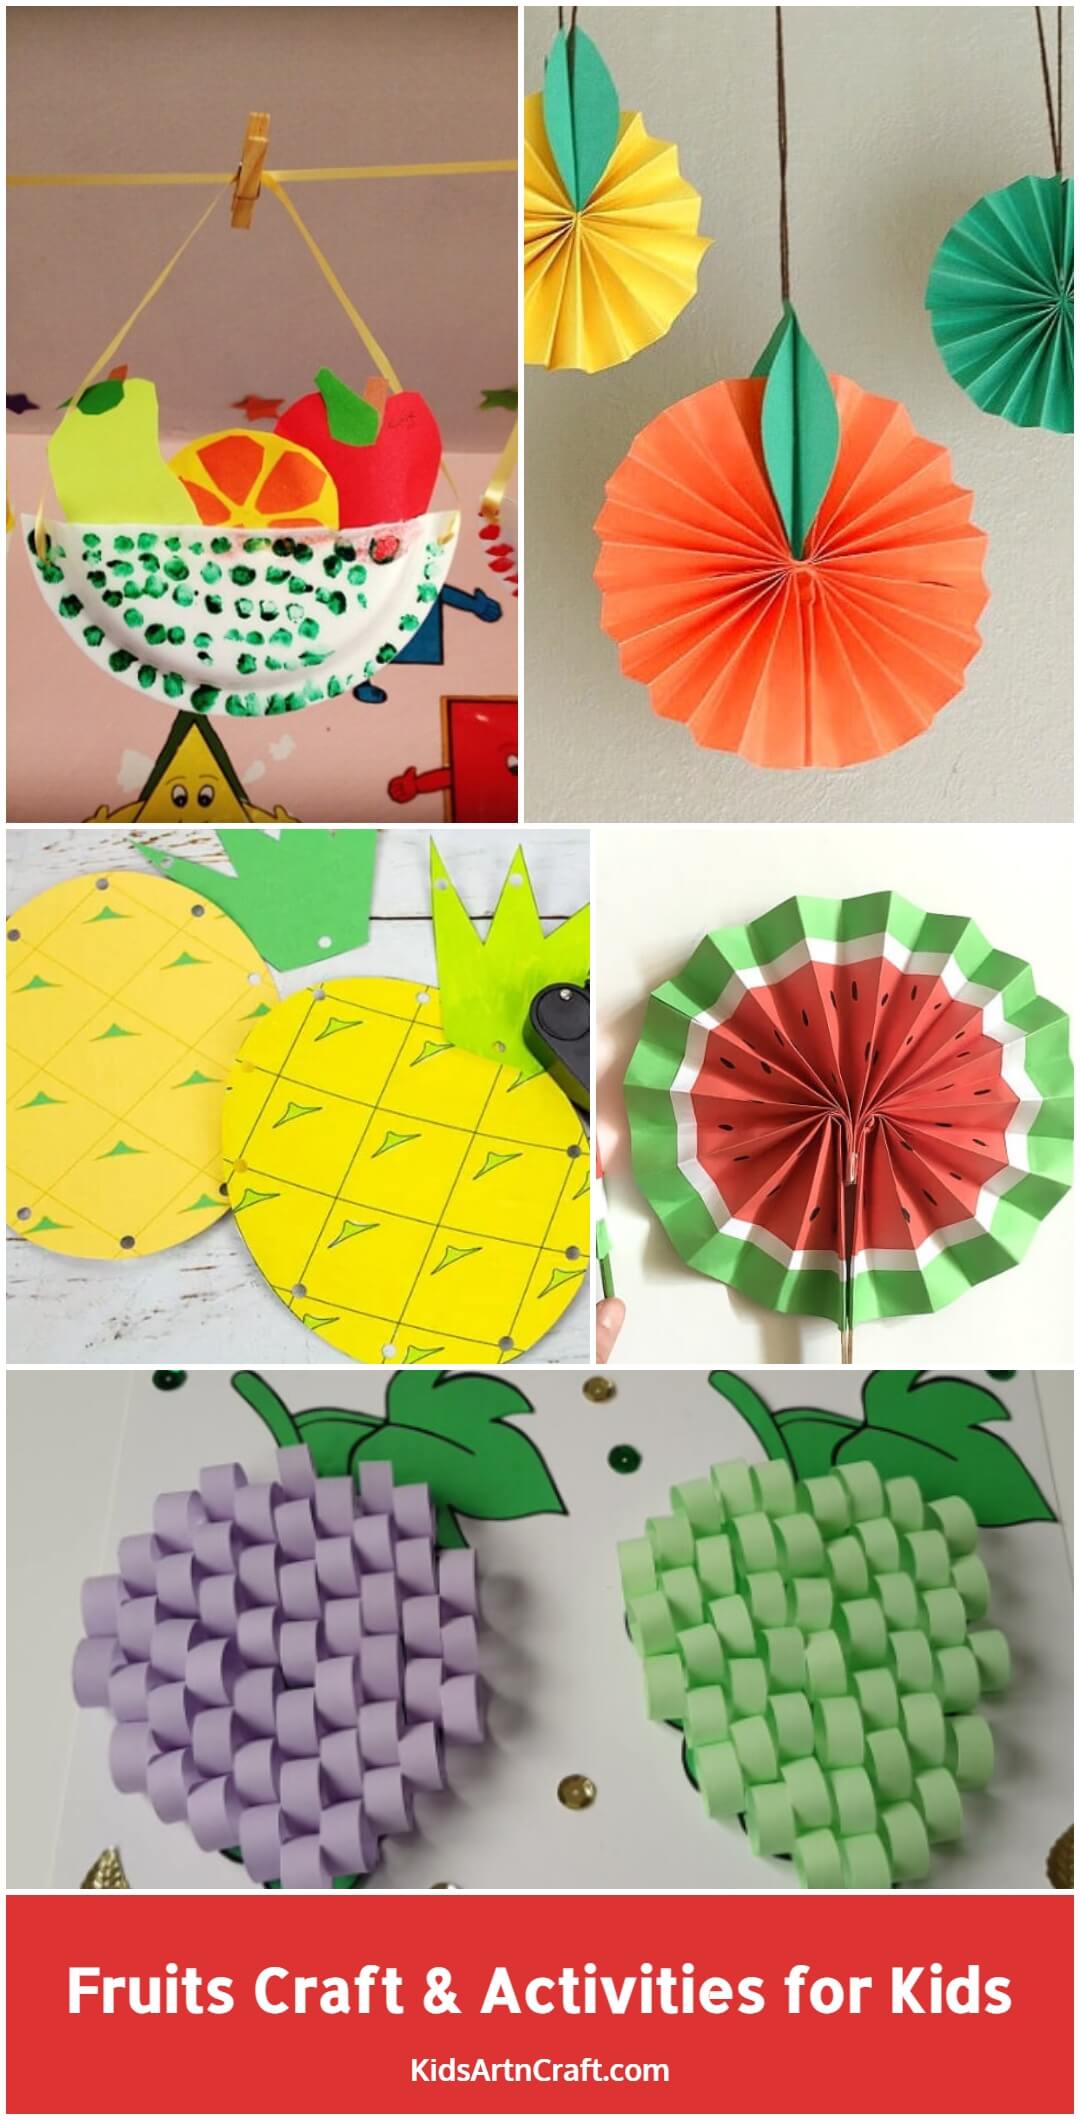 Fruits Crafts & Activities for Kids